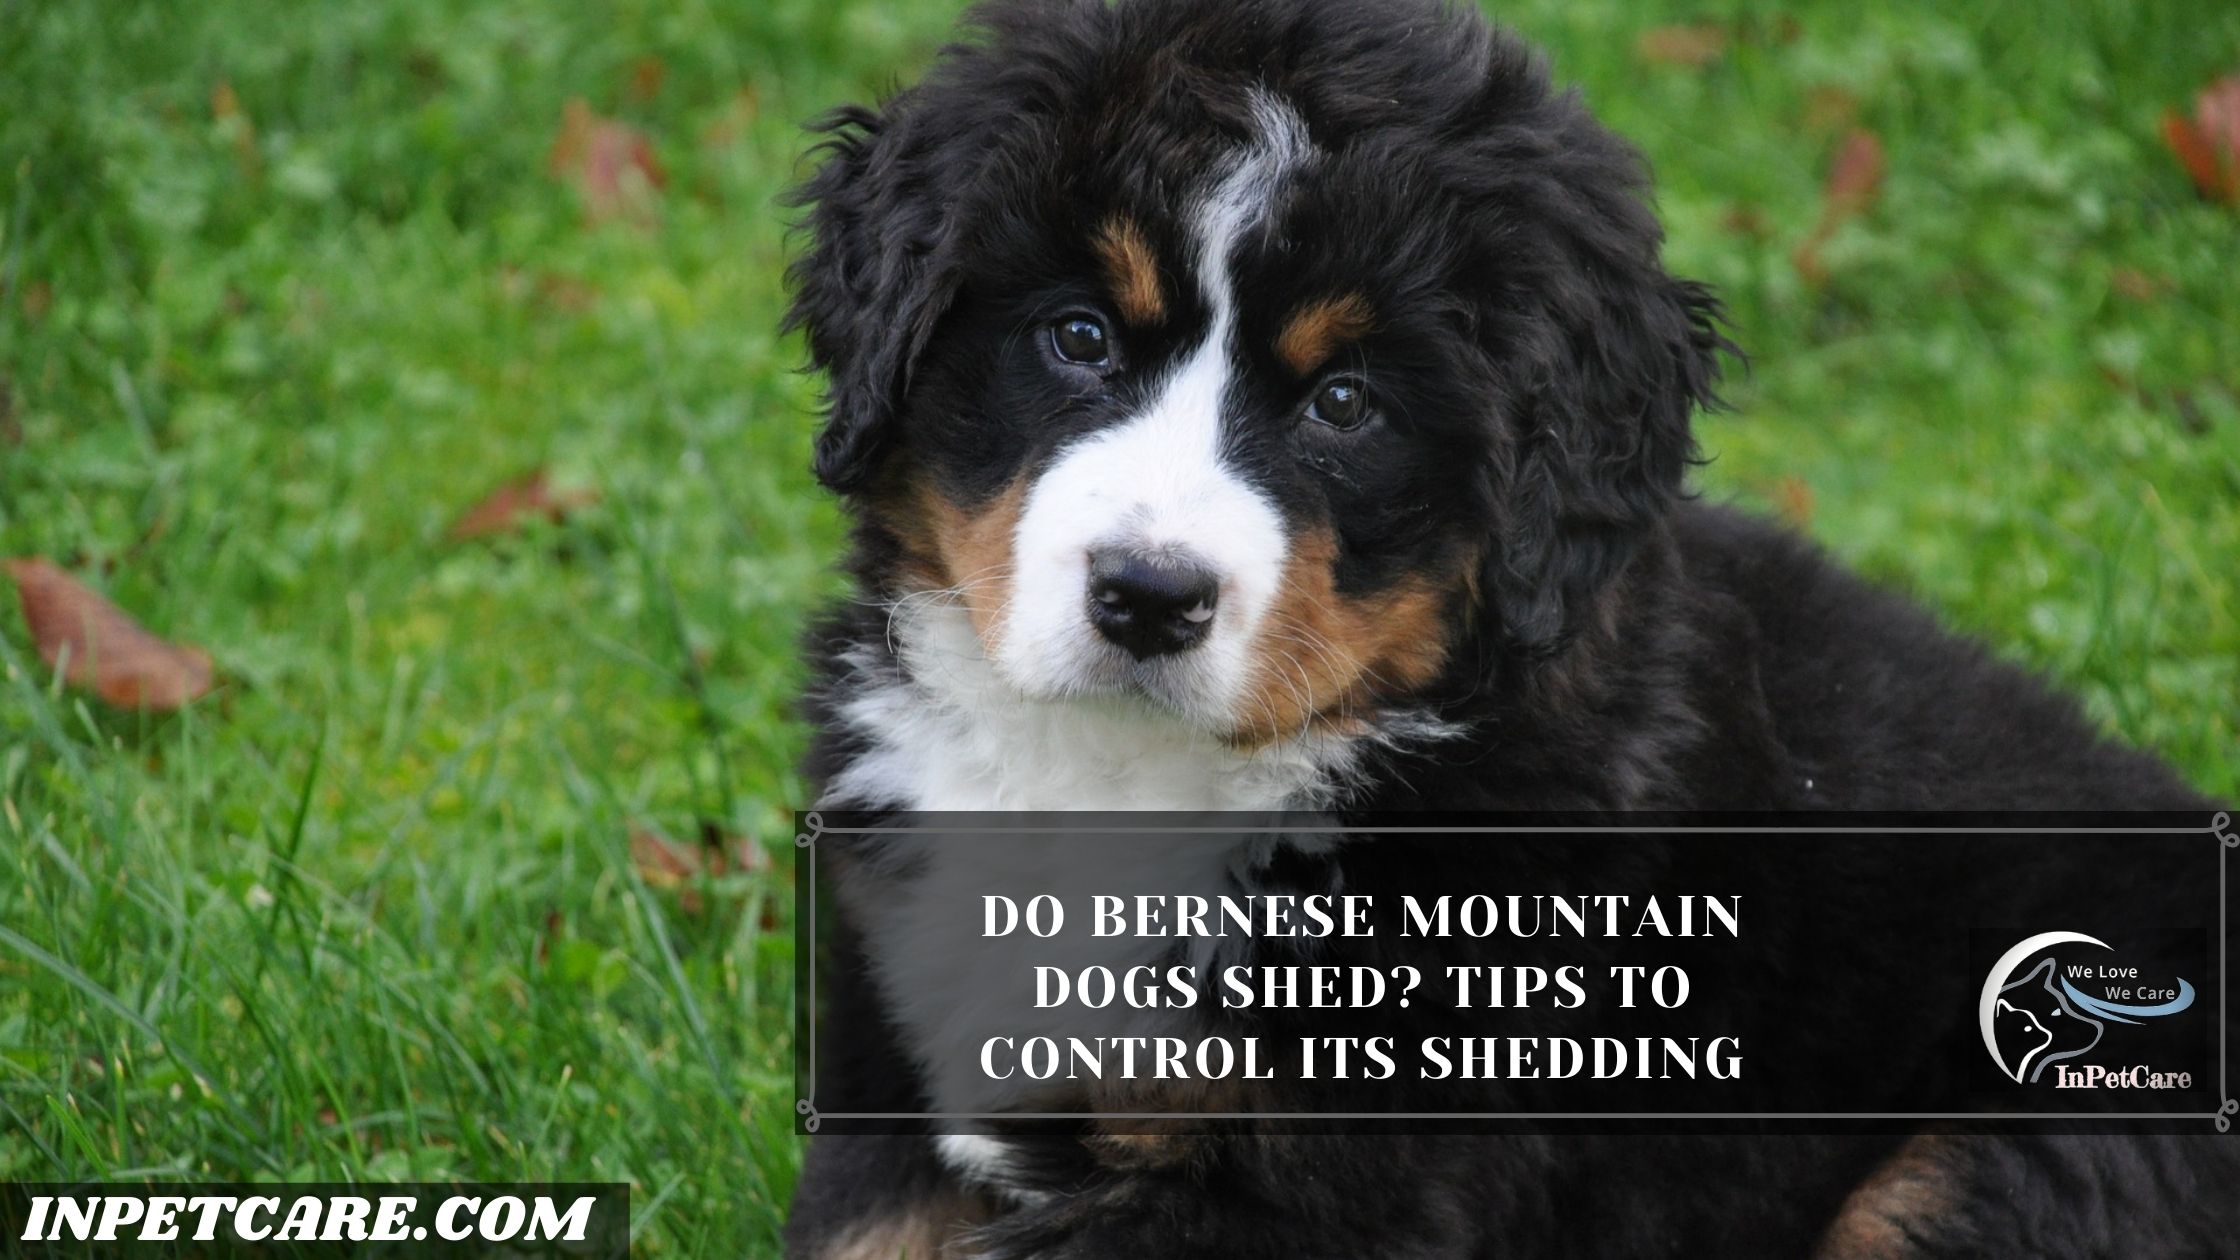 Do Bernese Mountain Dogs Shed?